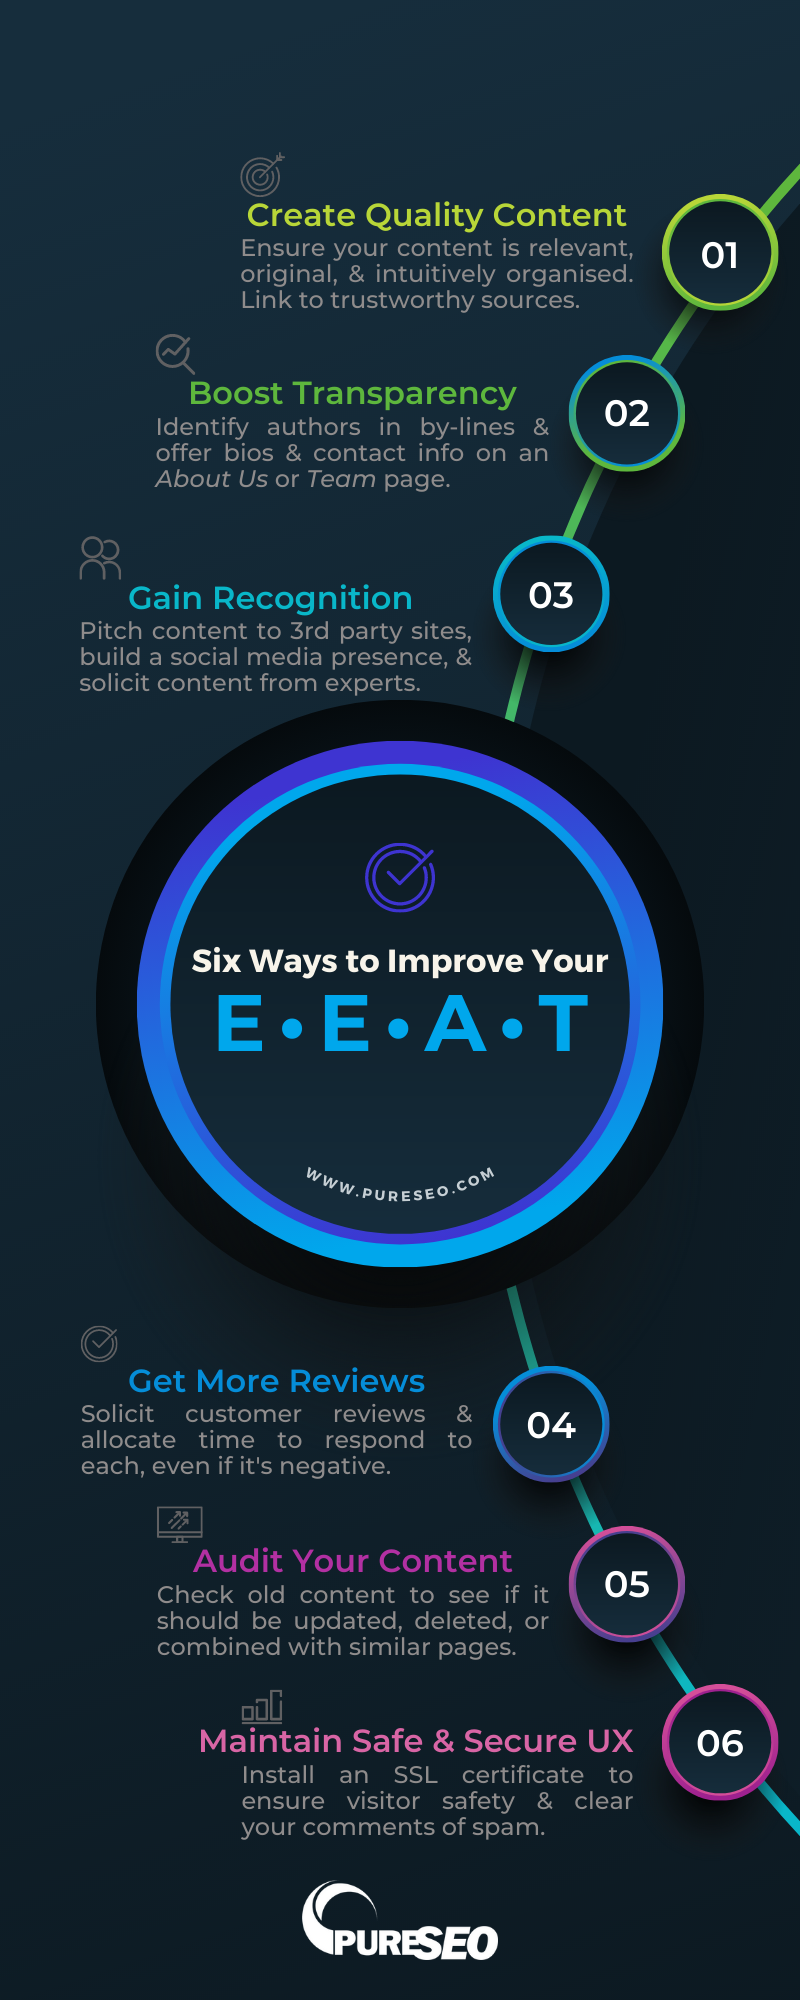 An infographic on six ways to improve your E-E-A-T